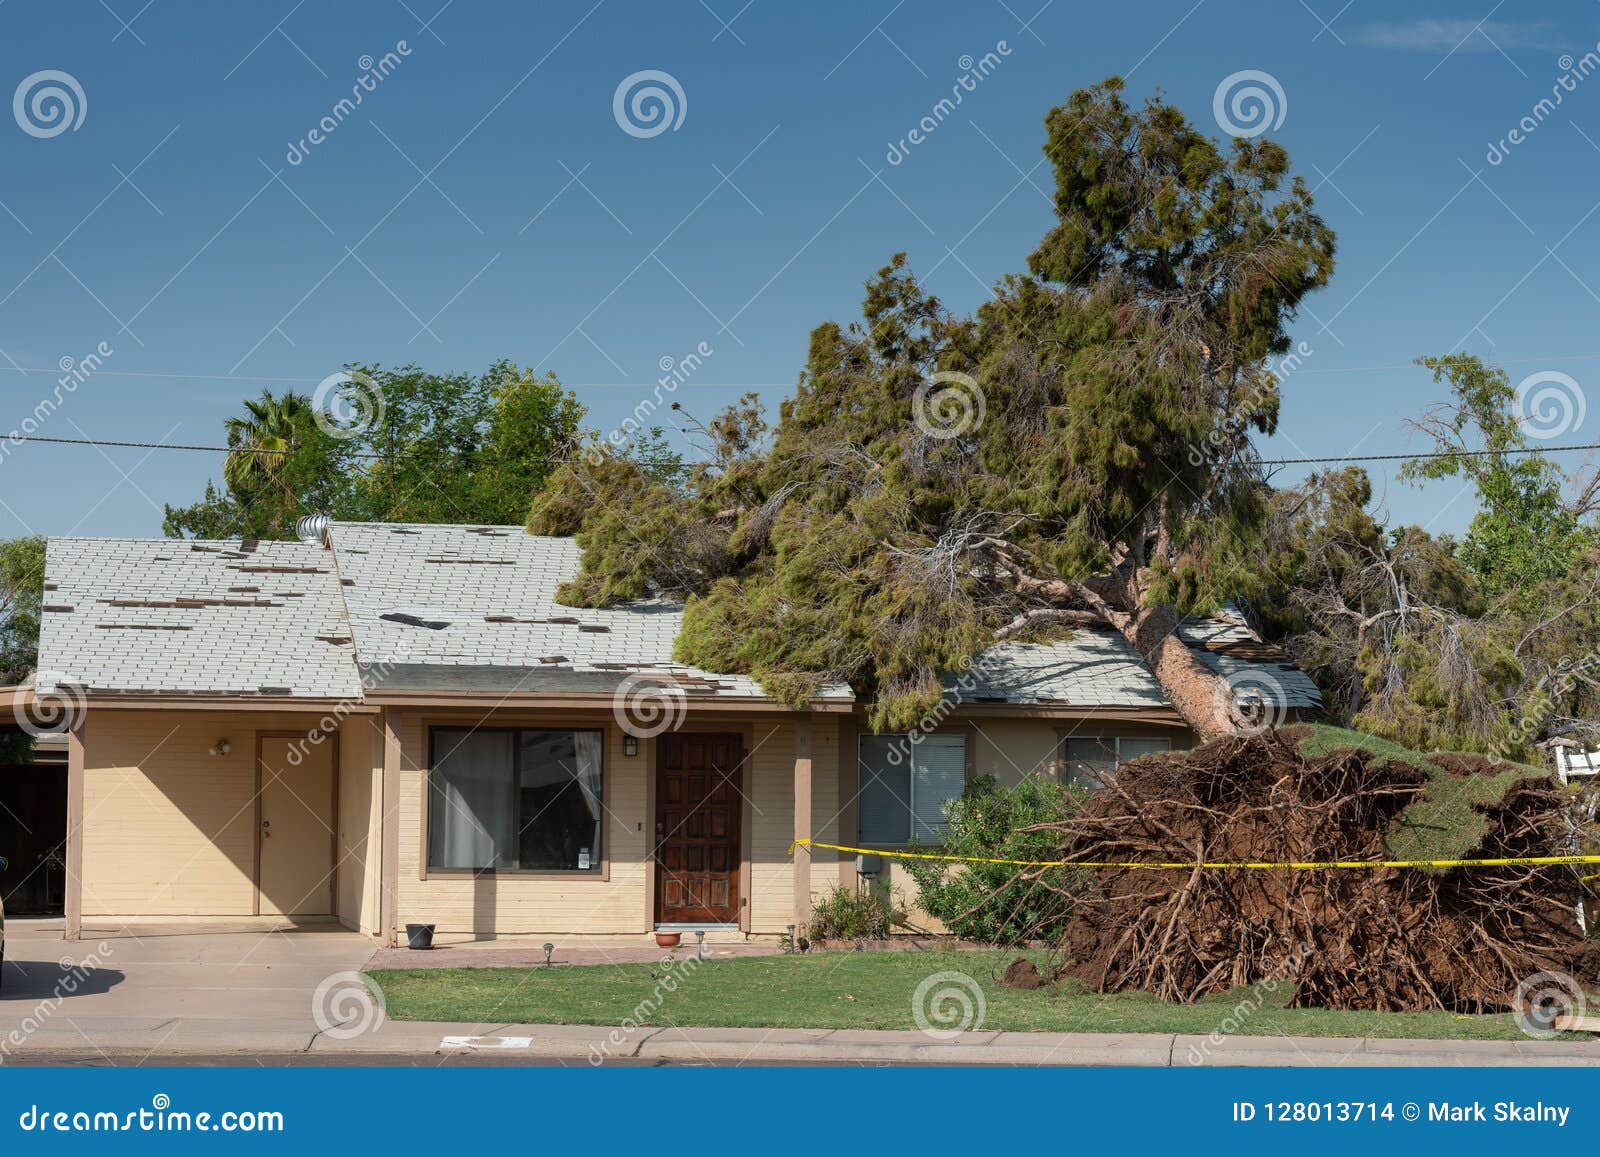 tree damage to roof after major monsoon